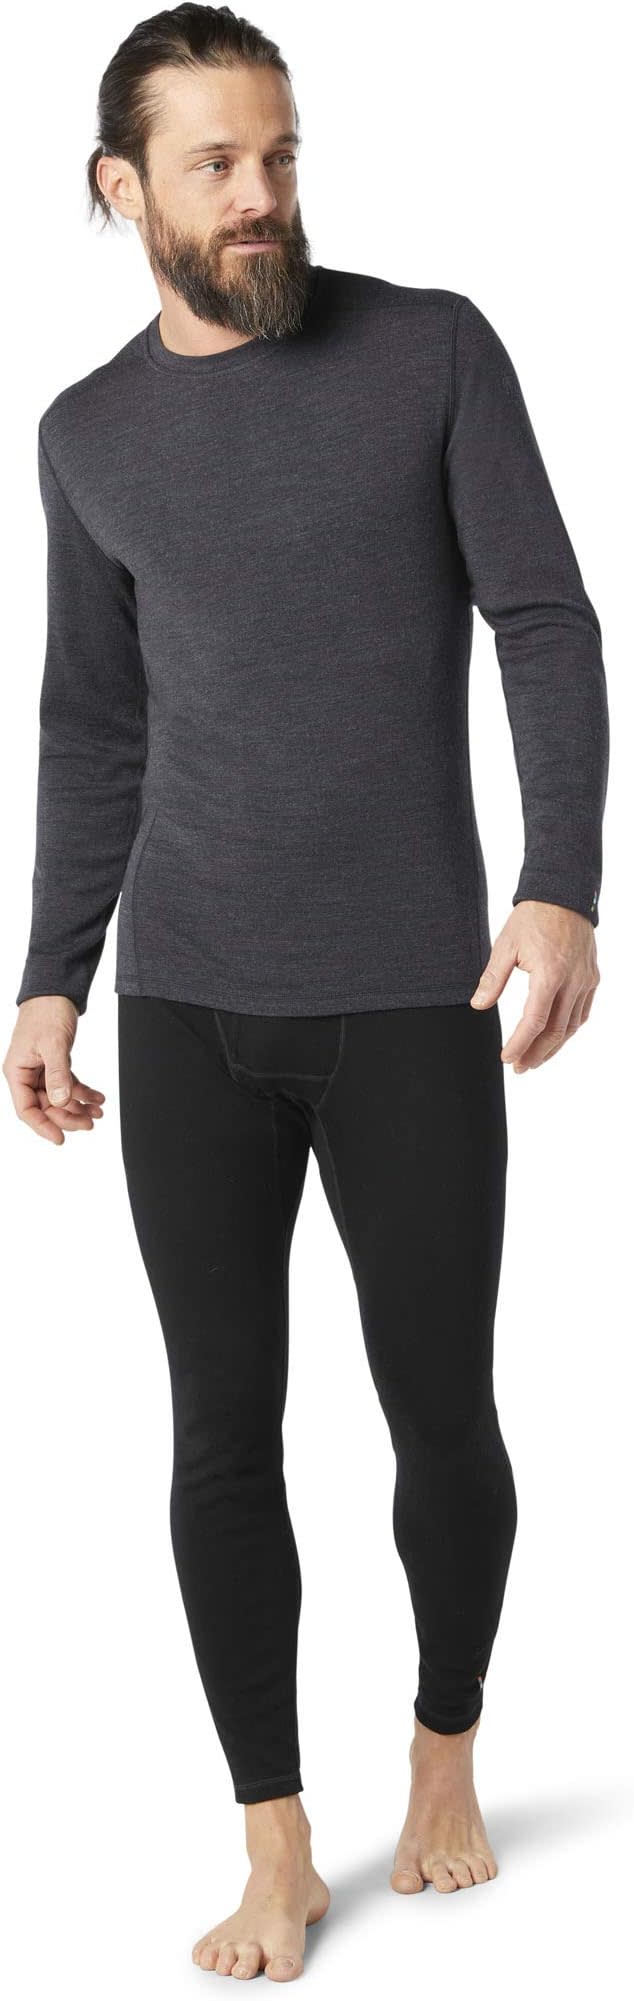 smartwool long johns review